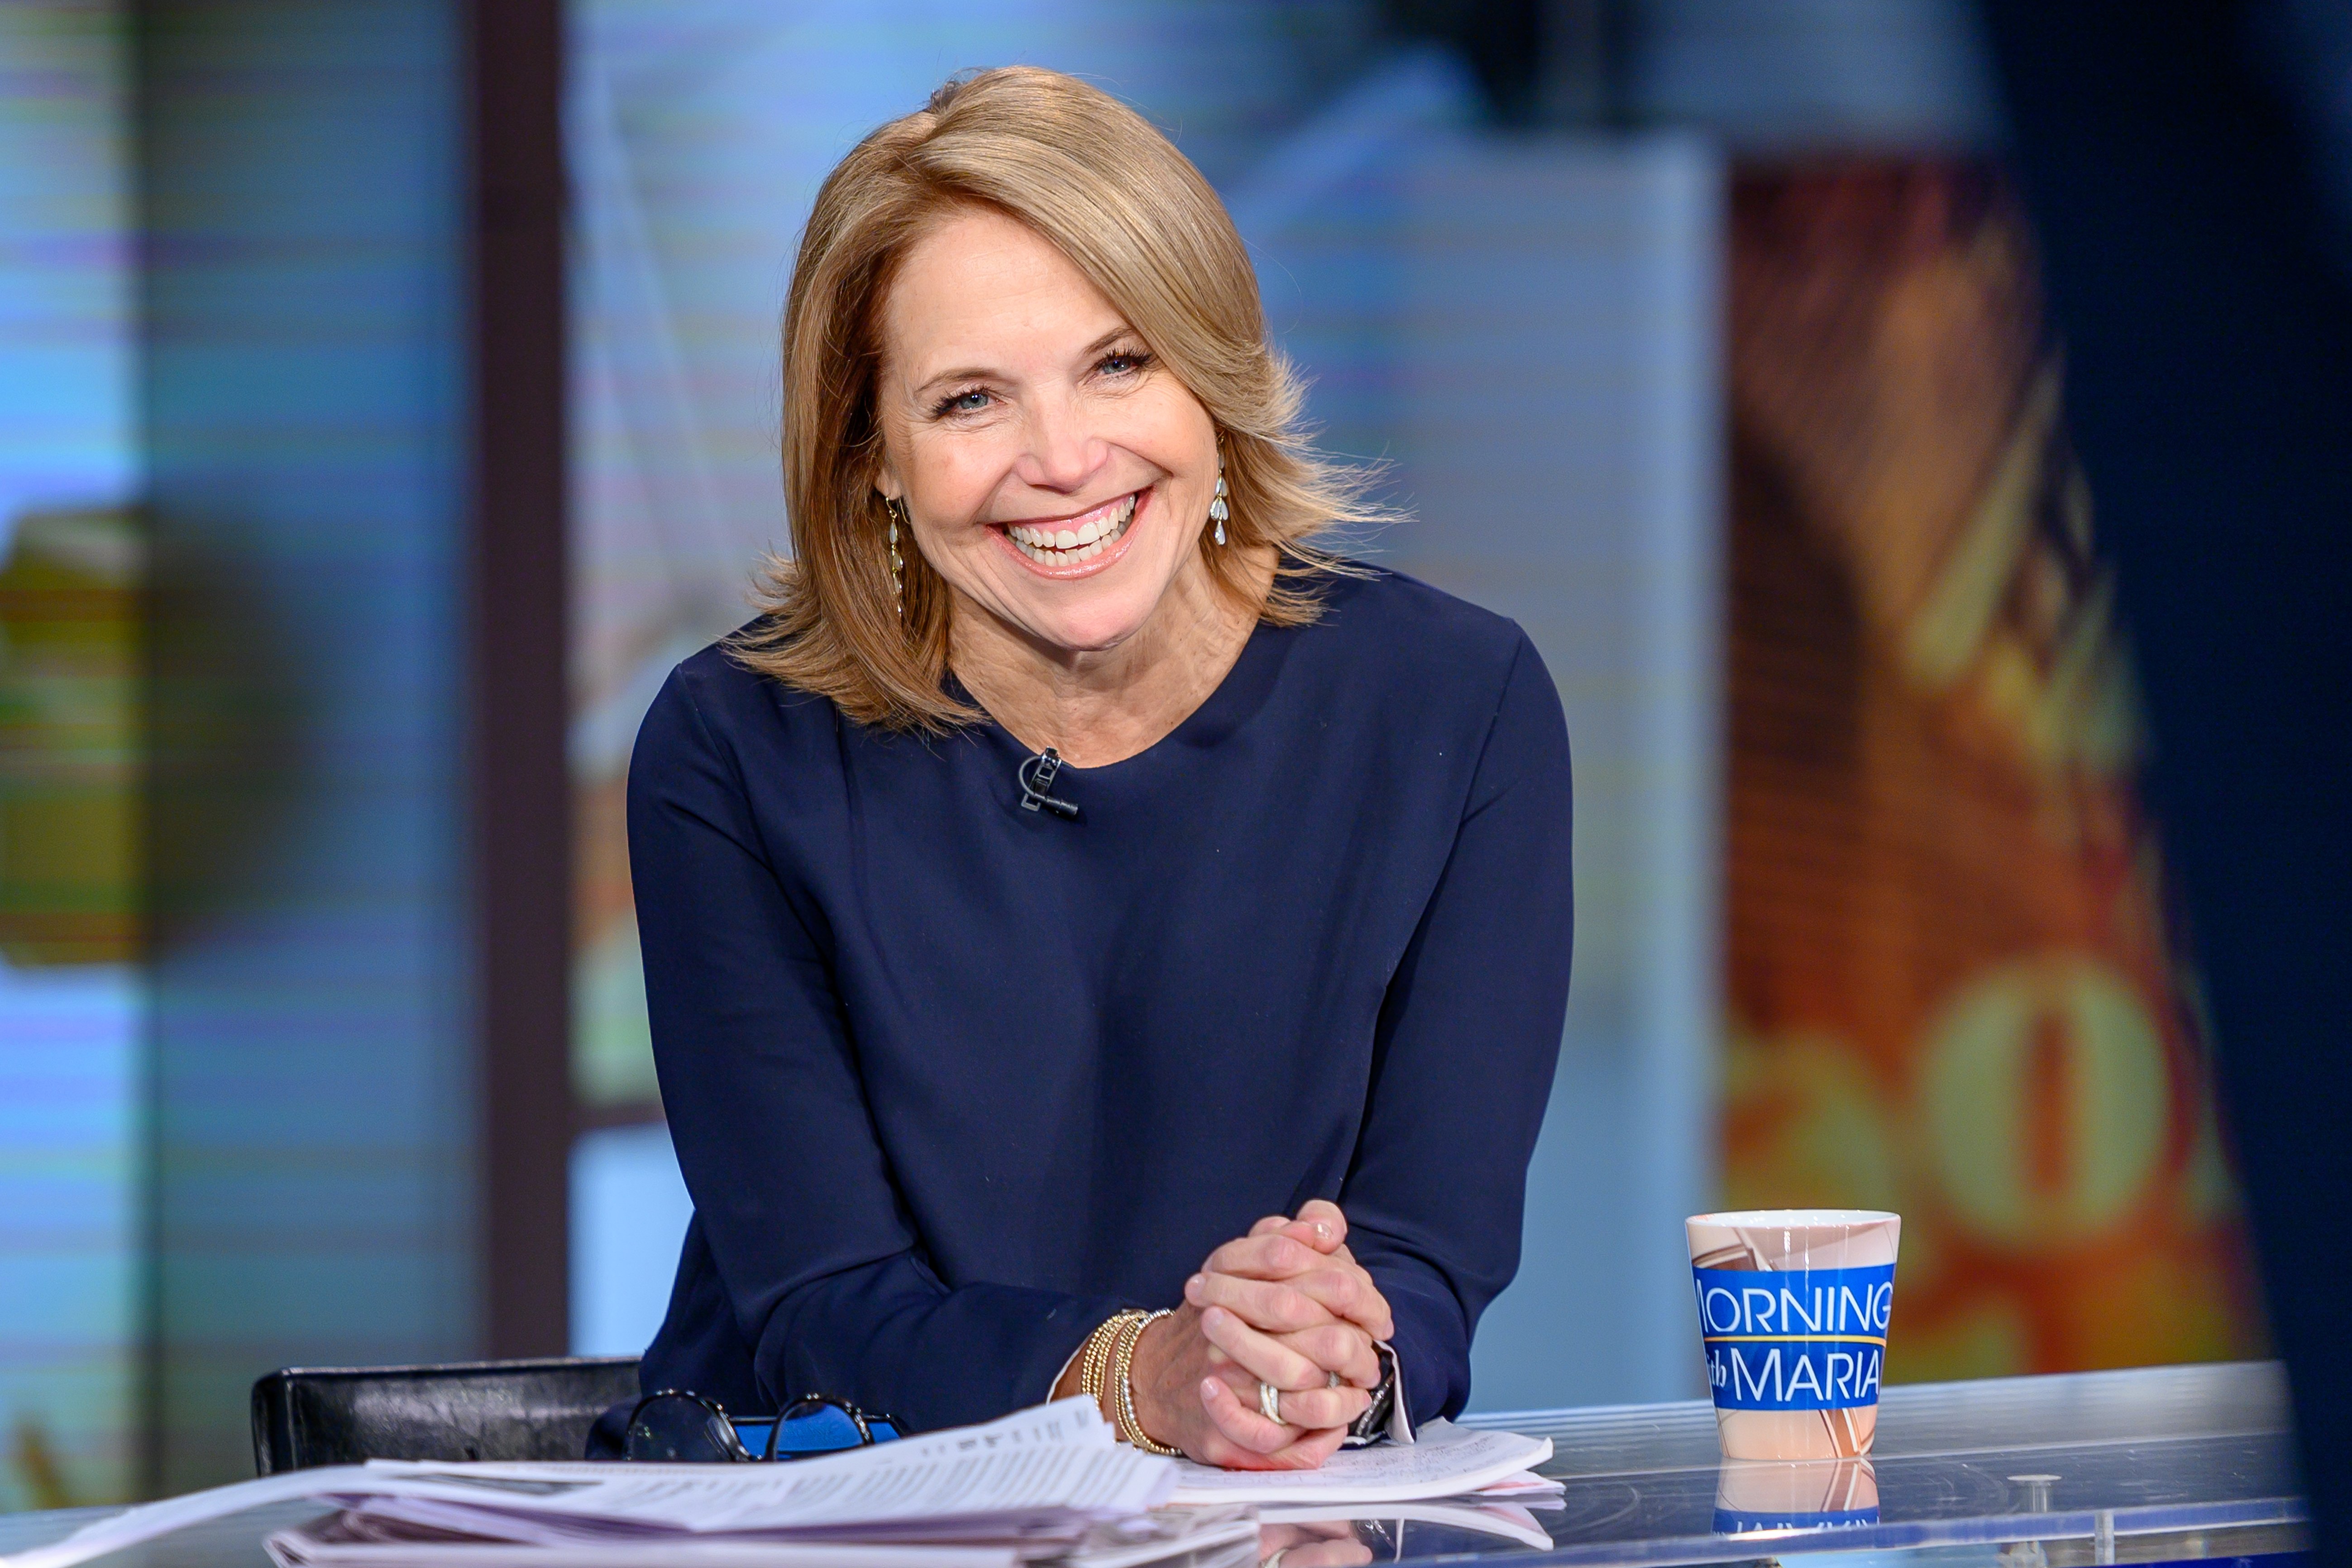 Katie Couric visits "Mornings With Maria" at Fox Business Network Studios on March 20, 2019. | Photo: Getty Images